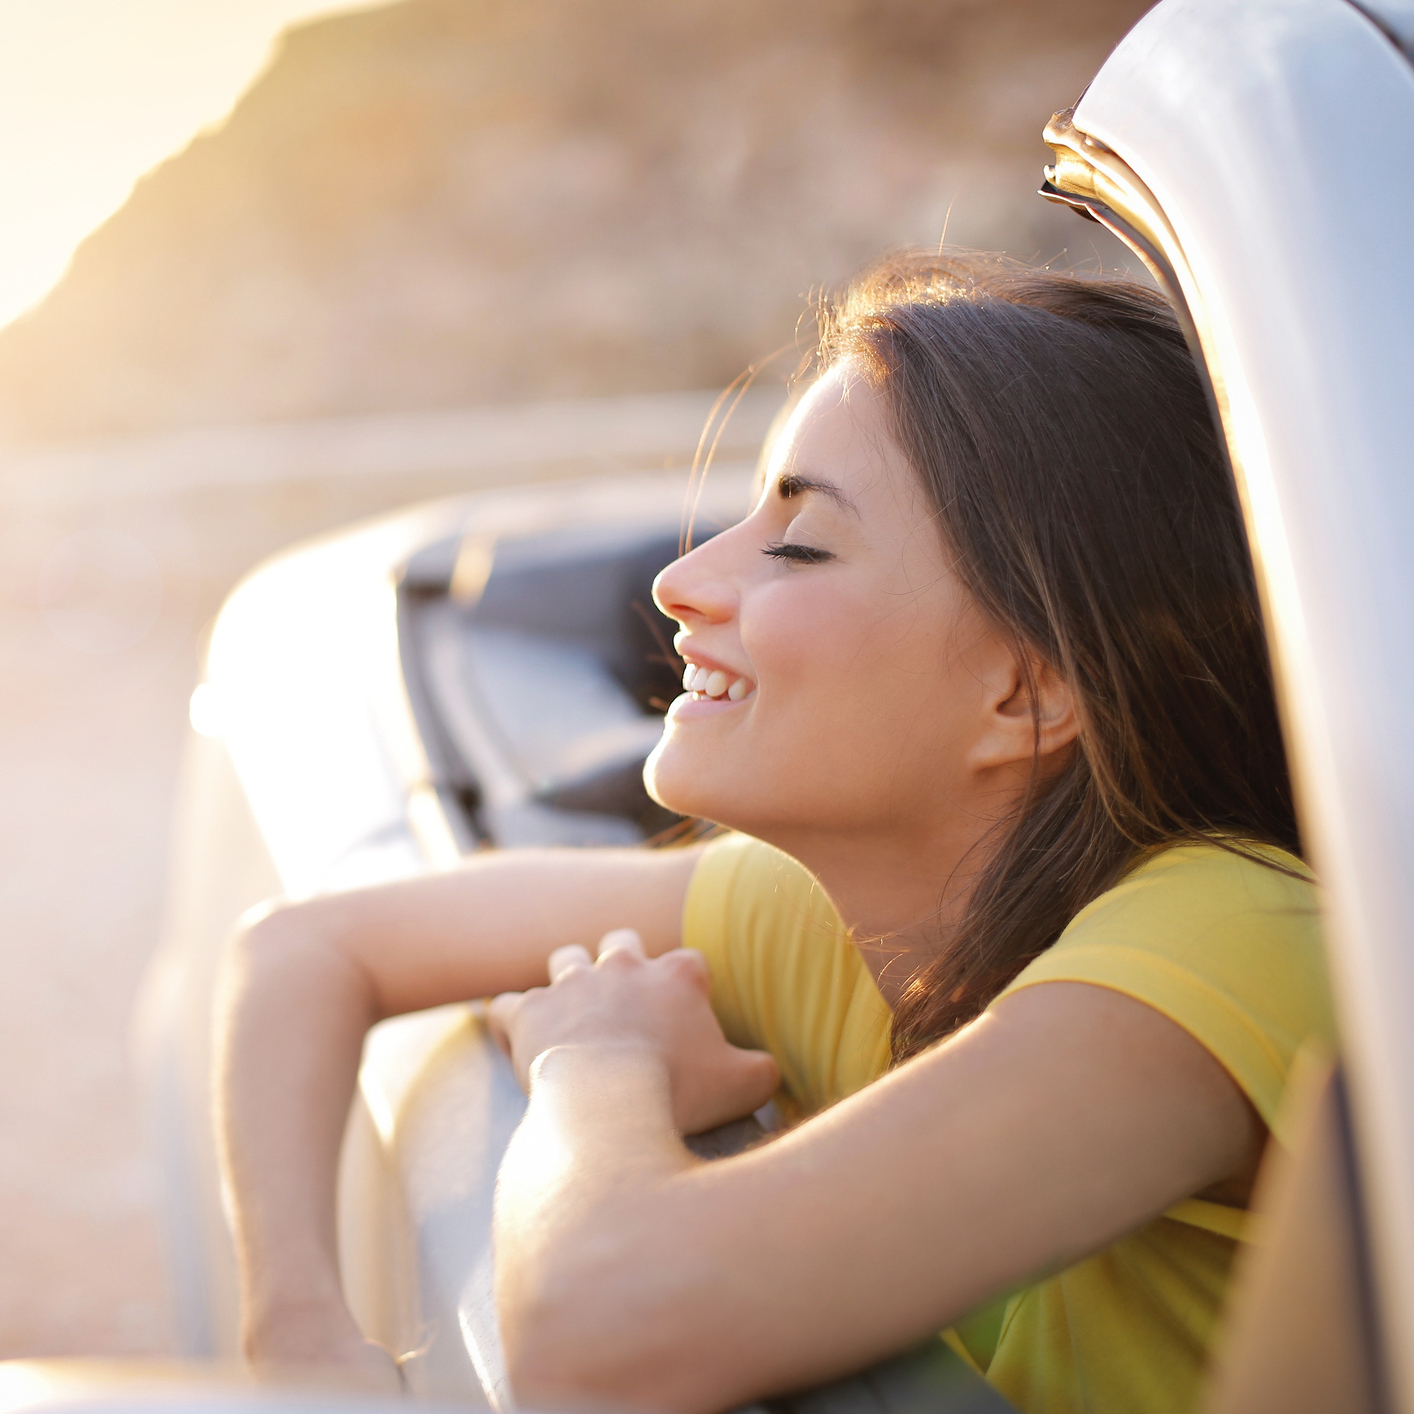 woman leaning out car window smiling and enjoy the air